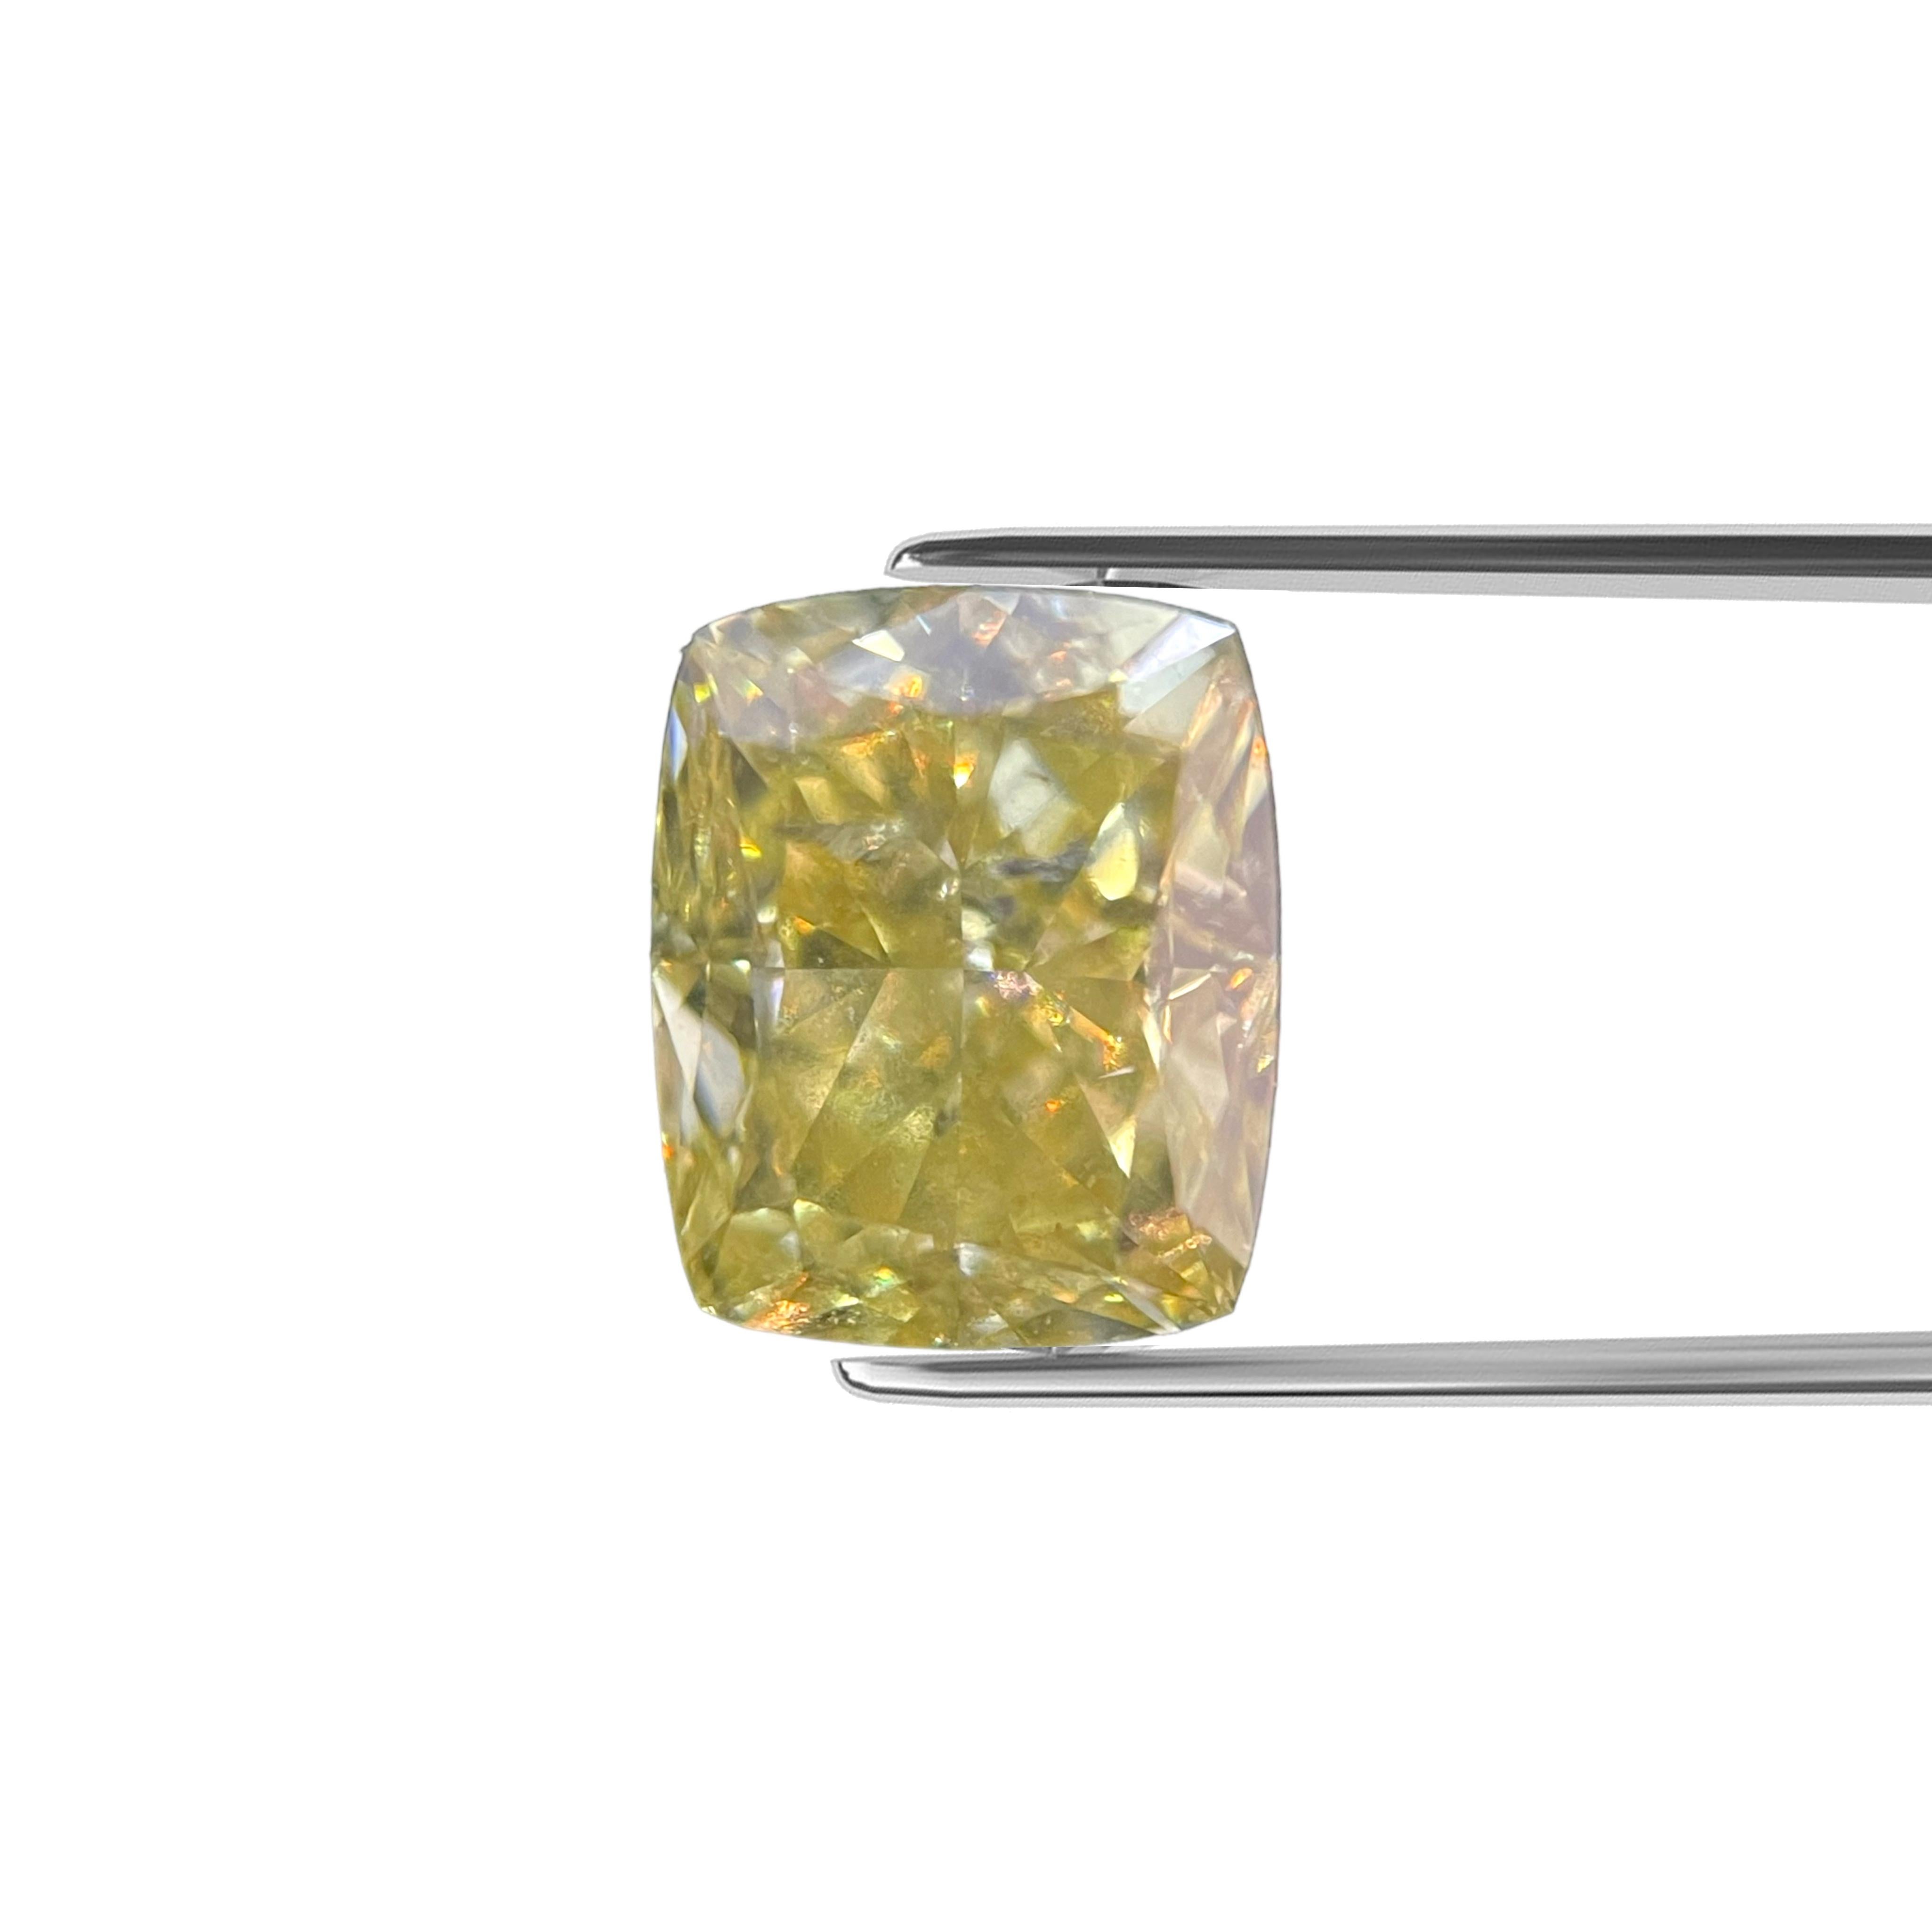 ITEM DESCRIPTION

ID #: NYC56424
Stone Shape: CUSHION MODIFIED BRILLIANT
Diamond Weight: 1.01ct
Clarity: SI2
Color: Fancy Yellow
Cut:	Excellent
Measurements: 5.96 x 4.90 x 3.70 mm
Symmetry: Very Good
Polish: Very Good
Certifying Lab: GIA
GIA